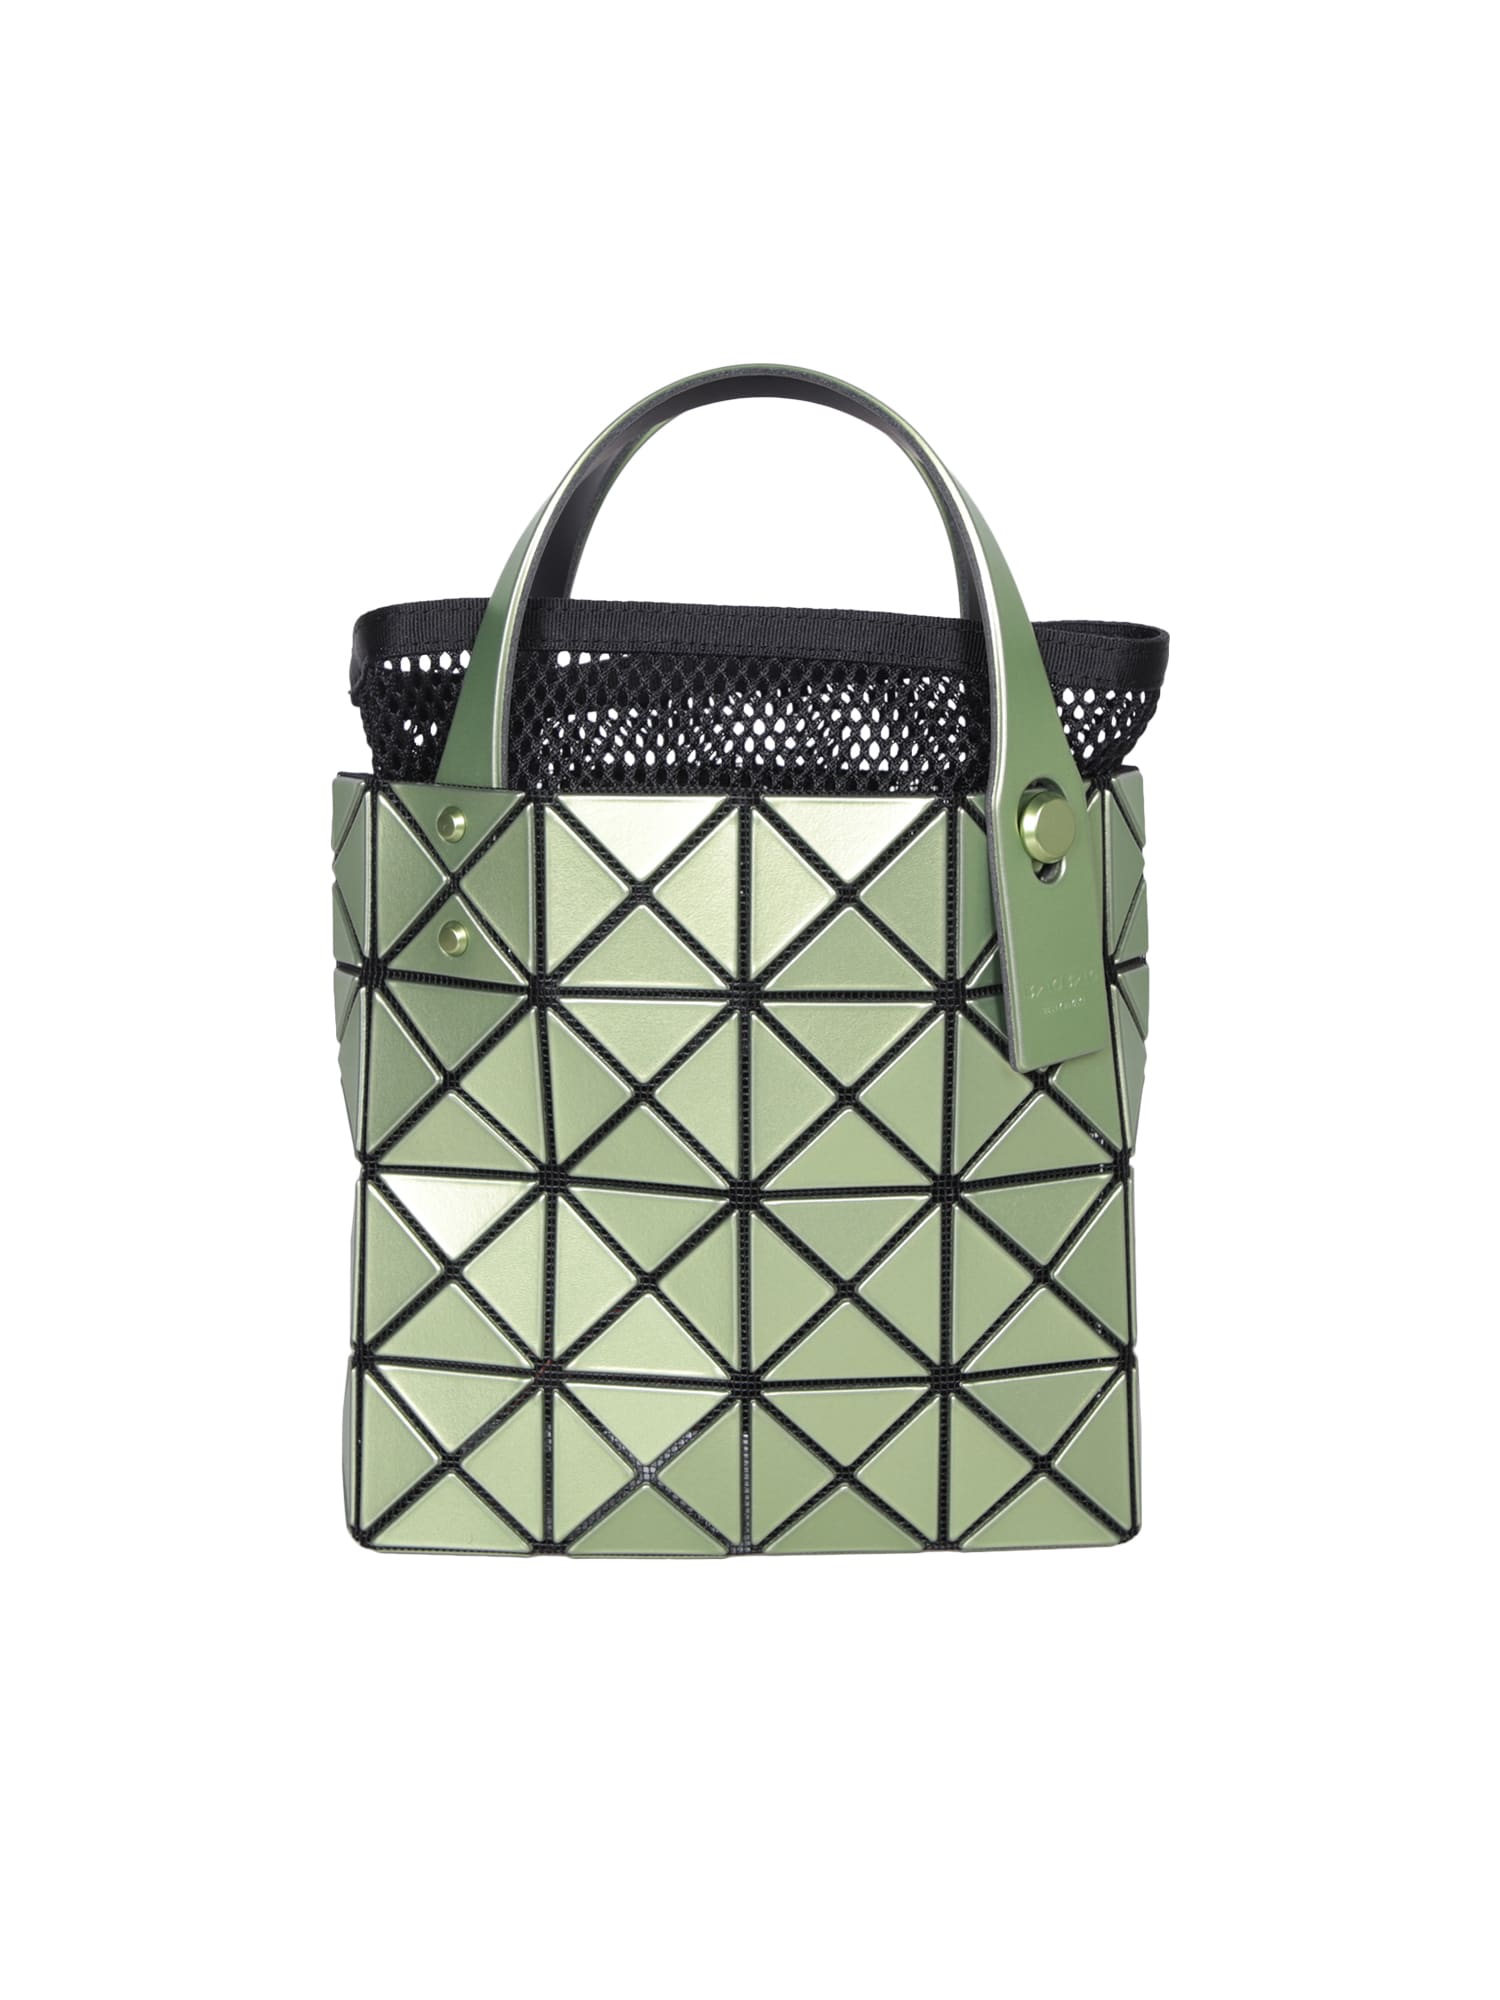 Lucent Boxy Green Bag